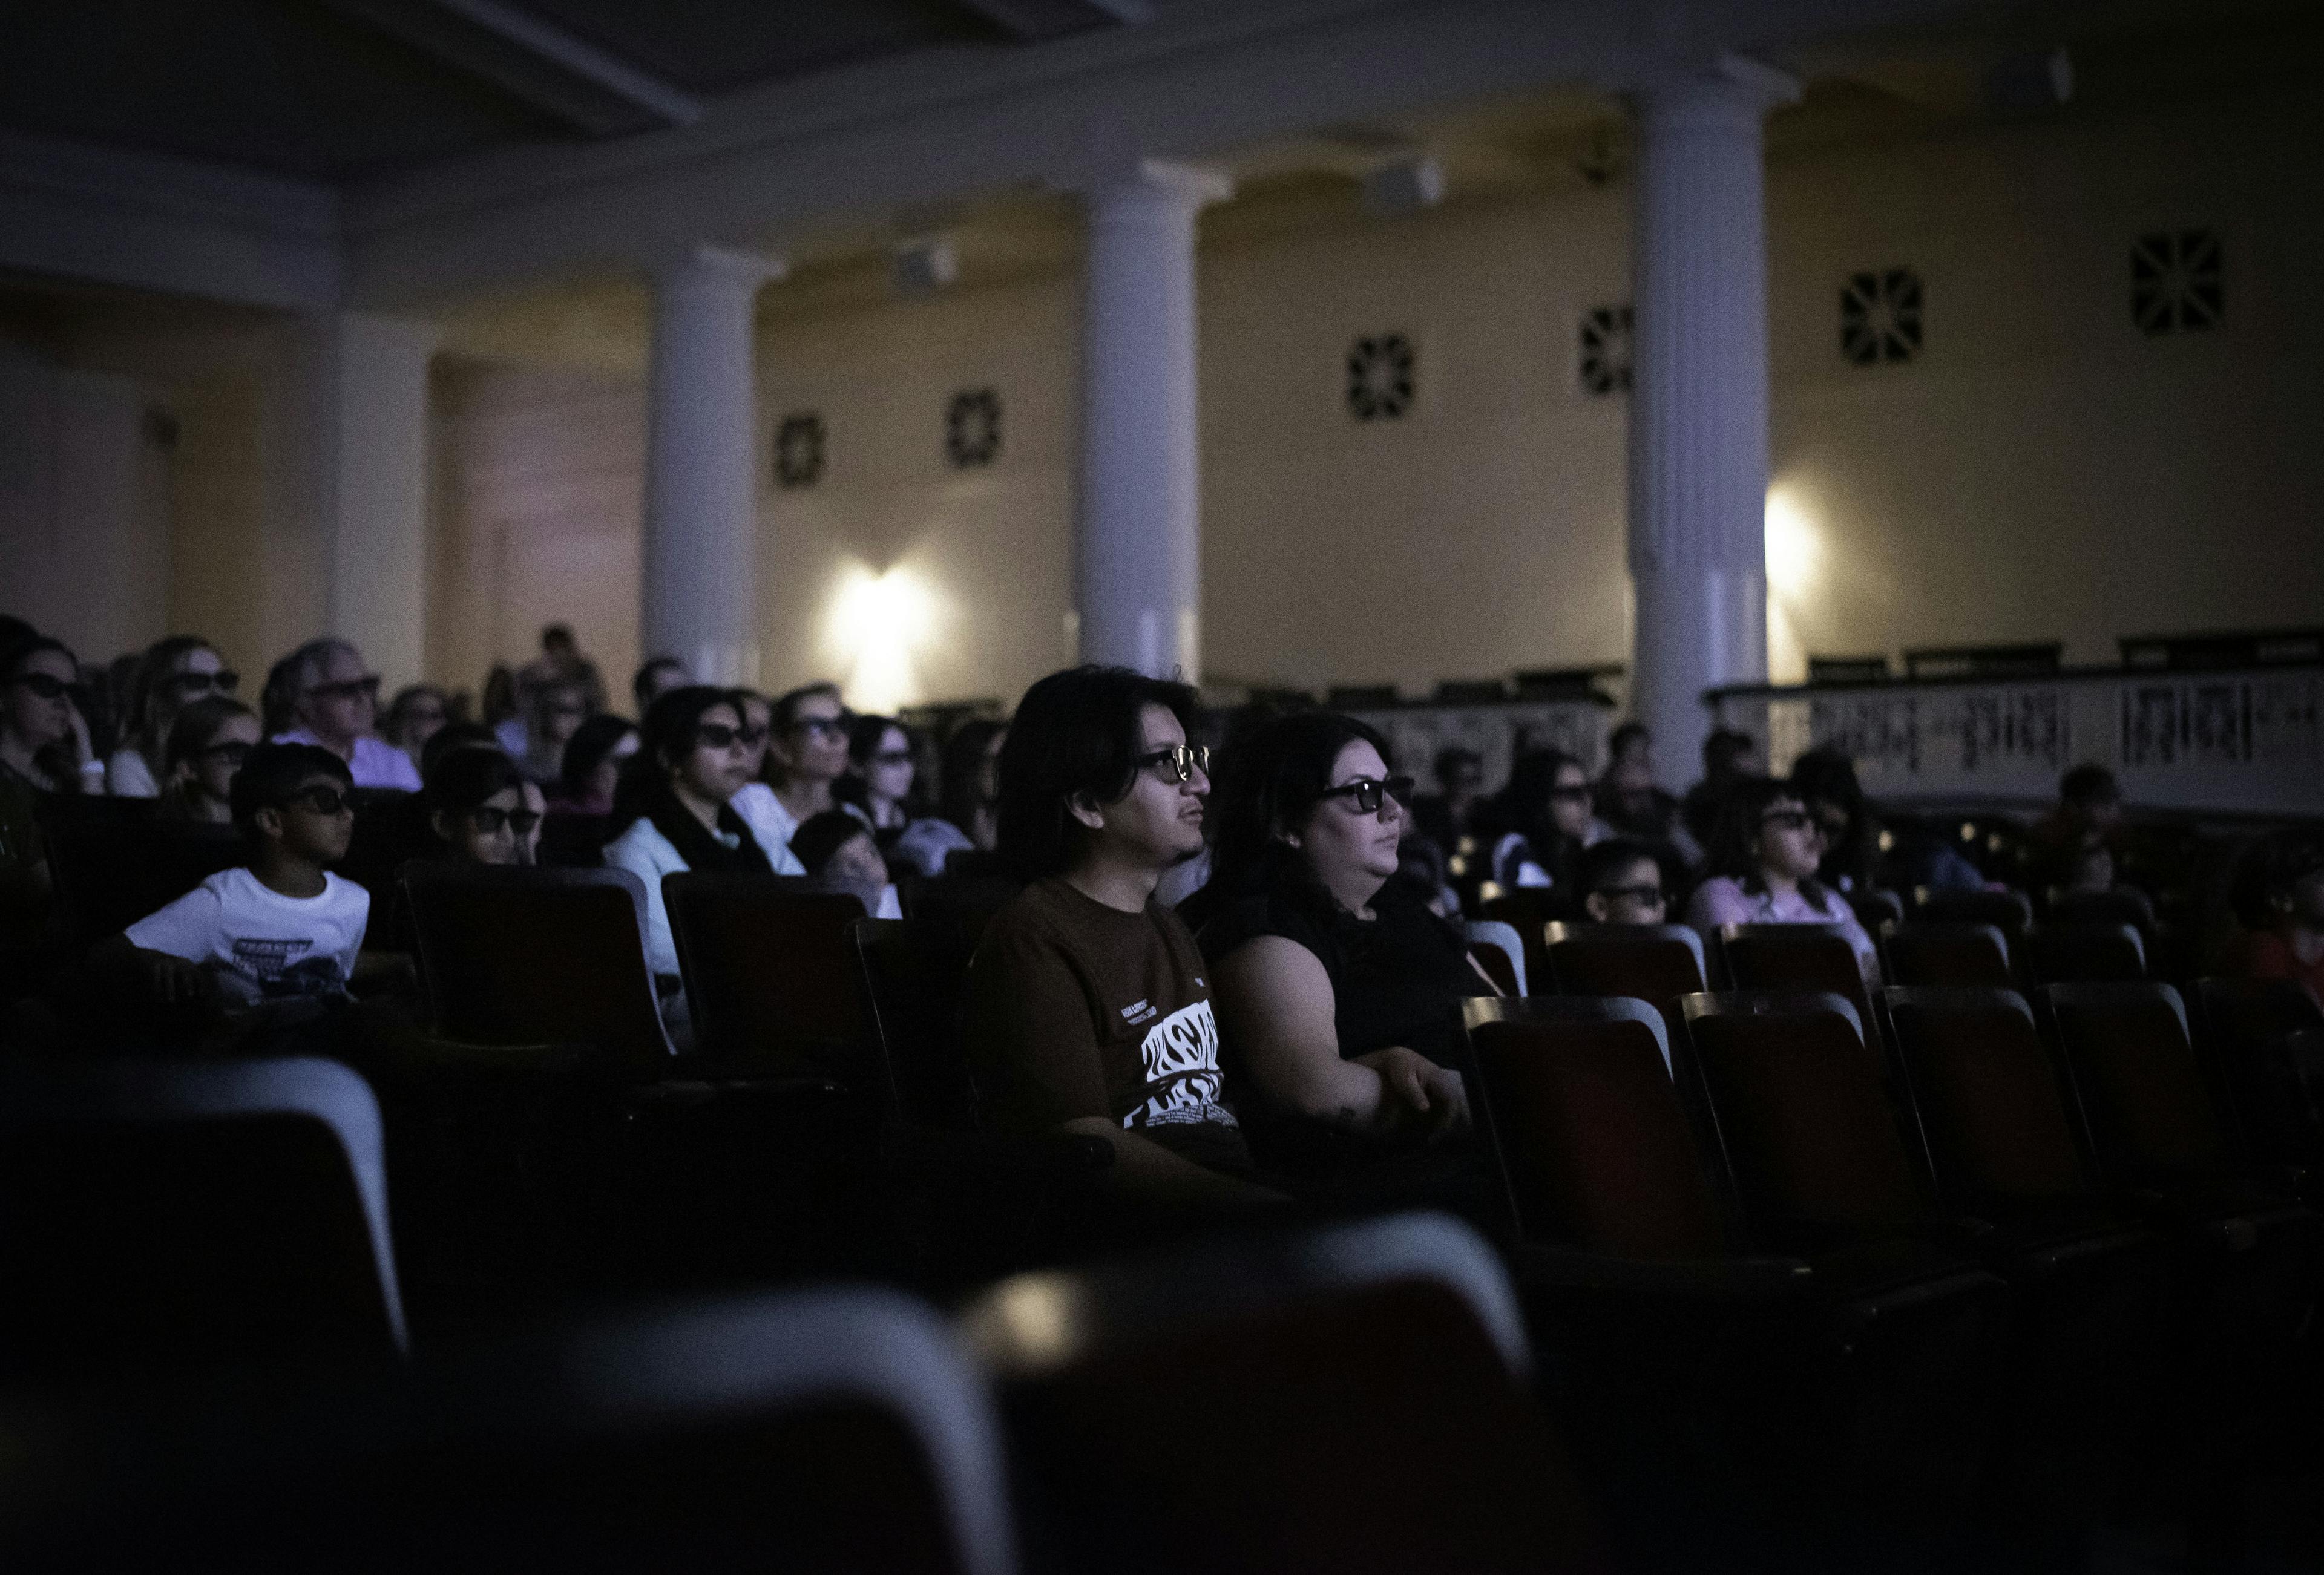 Visitors wearing 3D glasses seated in a theater.